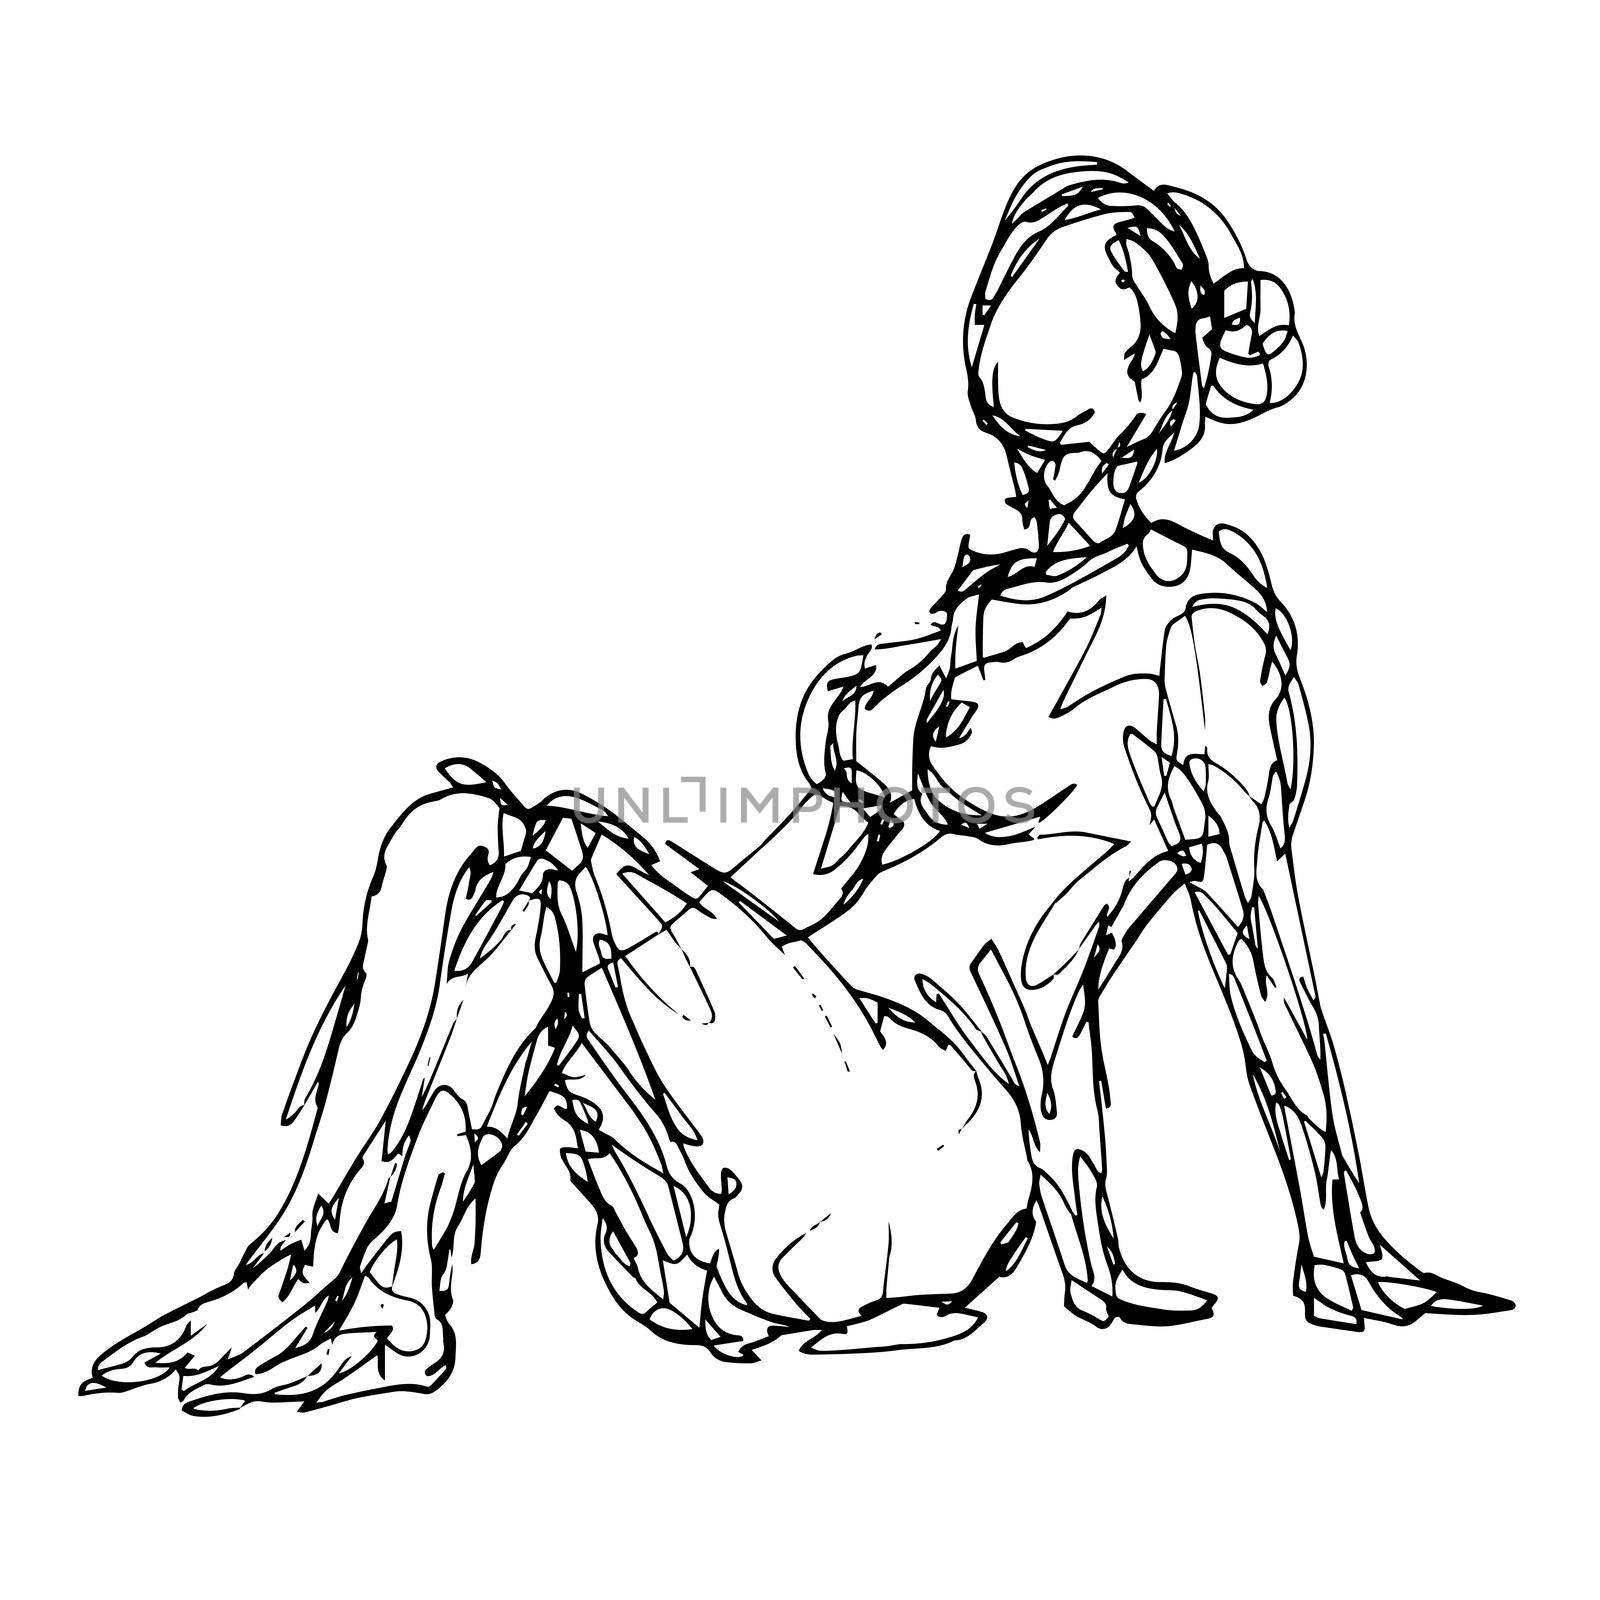 Nude Female Human Figure Model Posing Sitting Down Doodle Art Continuous Line Drawing  by patrimonio